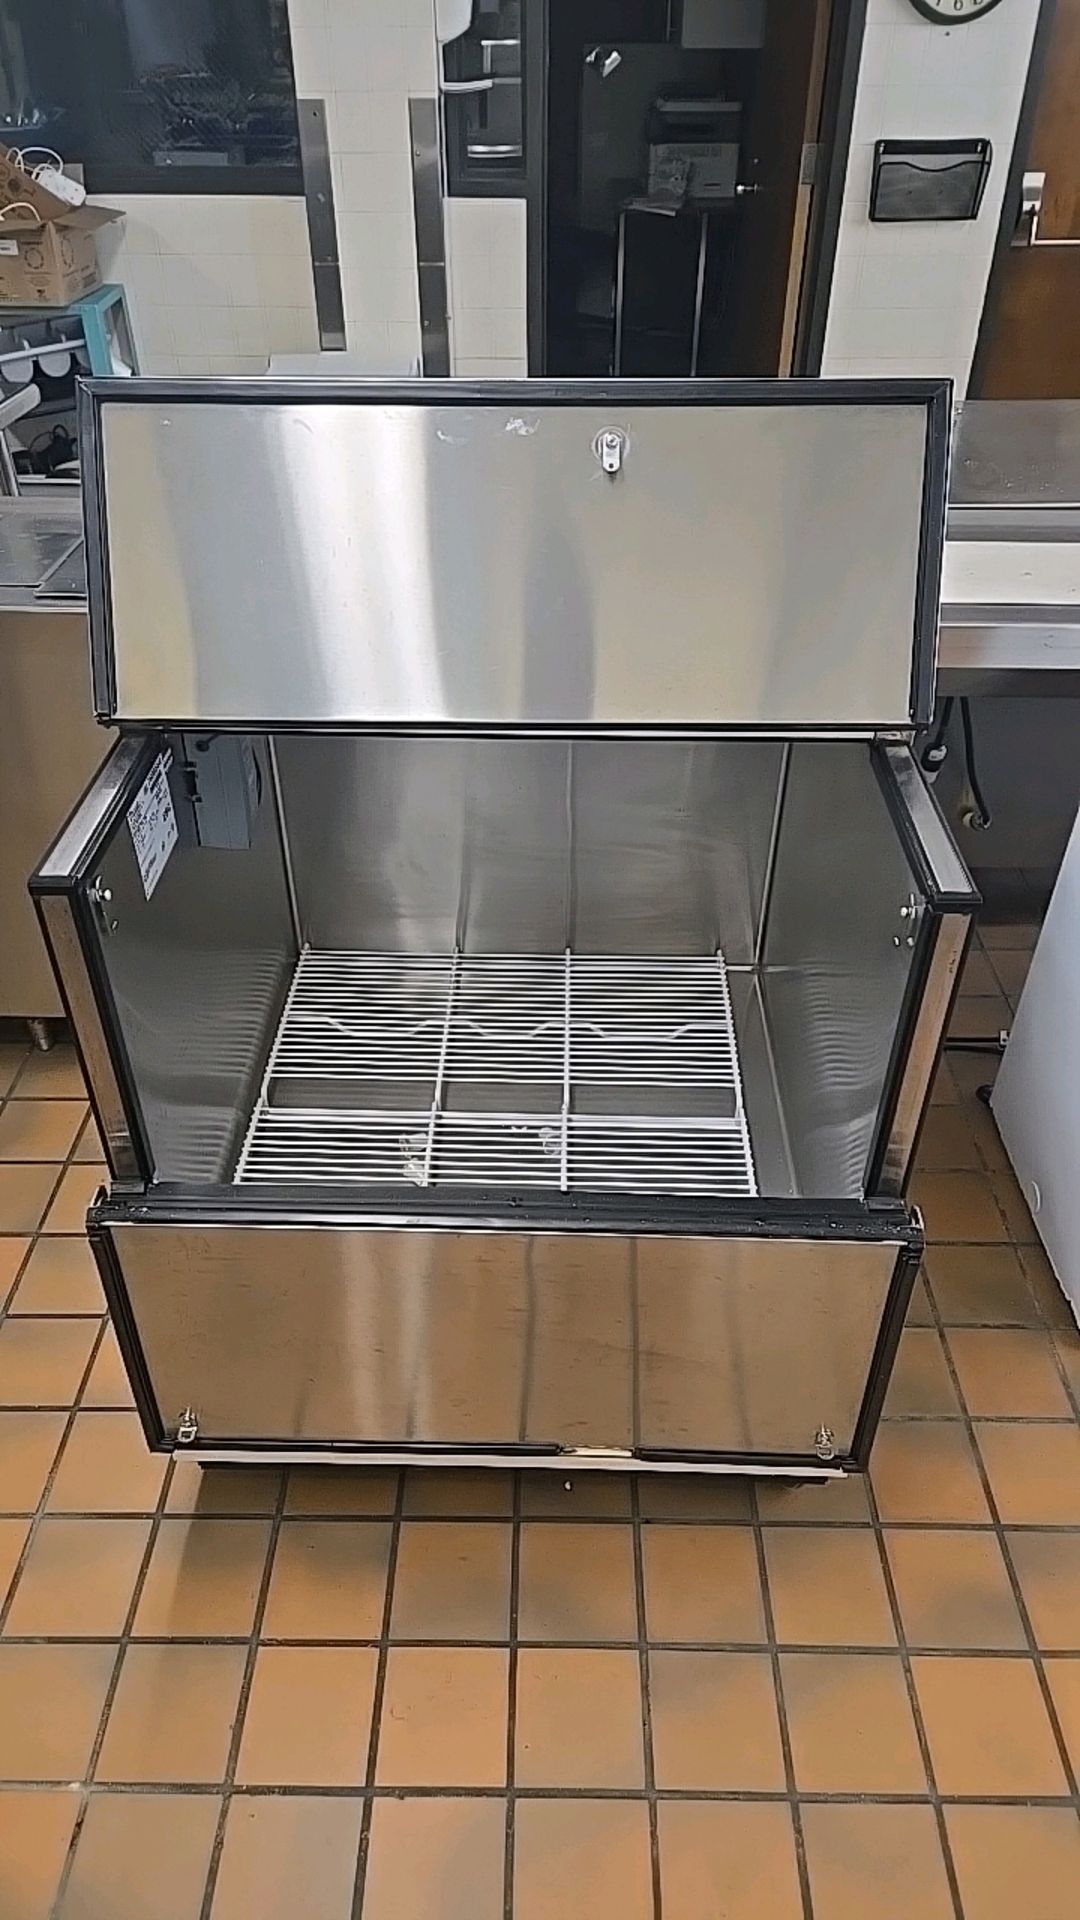 TRUE TMC-34-SS MILK COOLER WITH TOP & SIDE ACCESS - Image 4 of 7